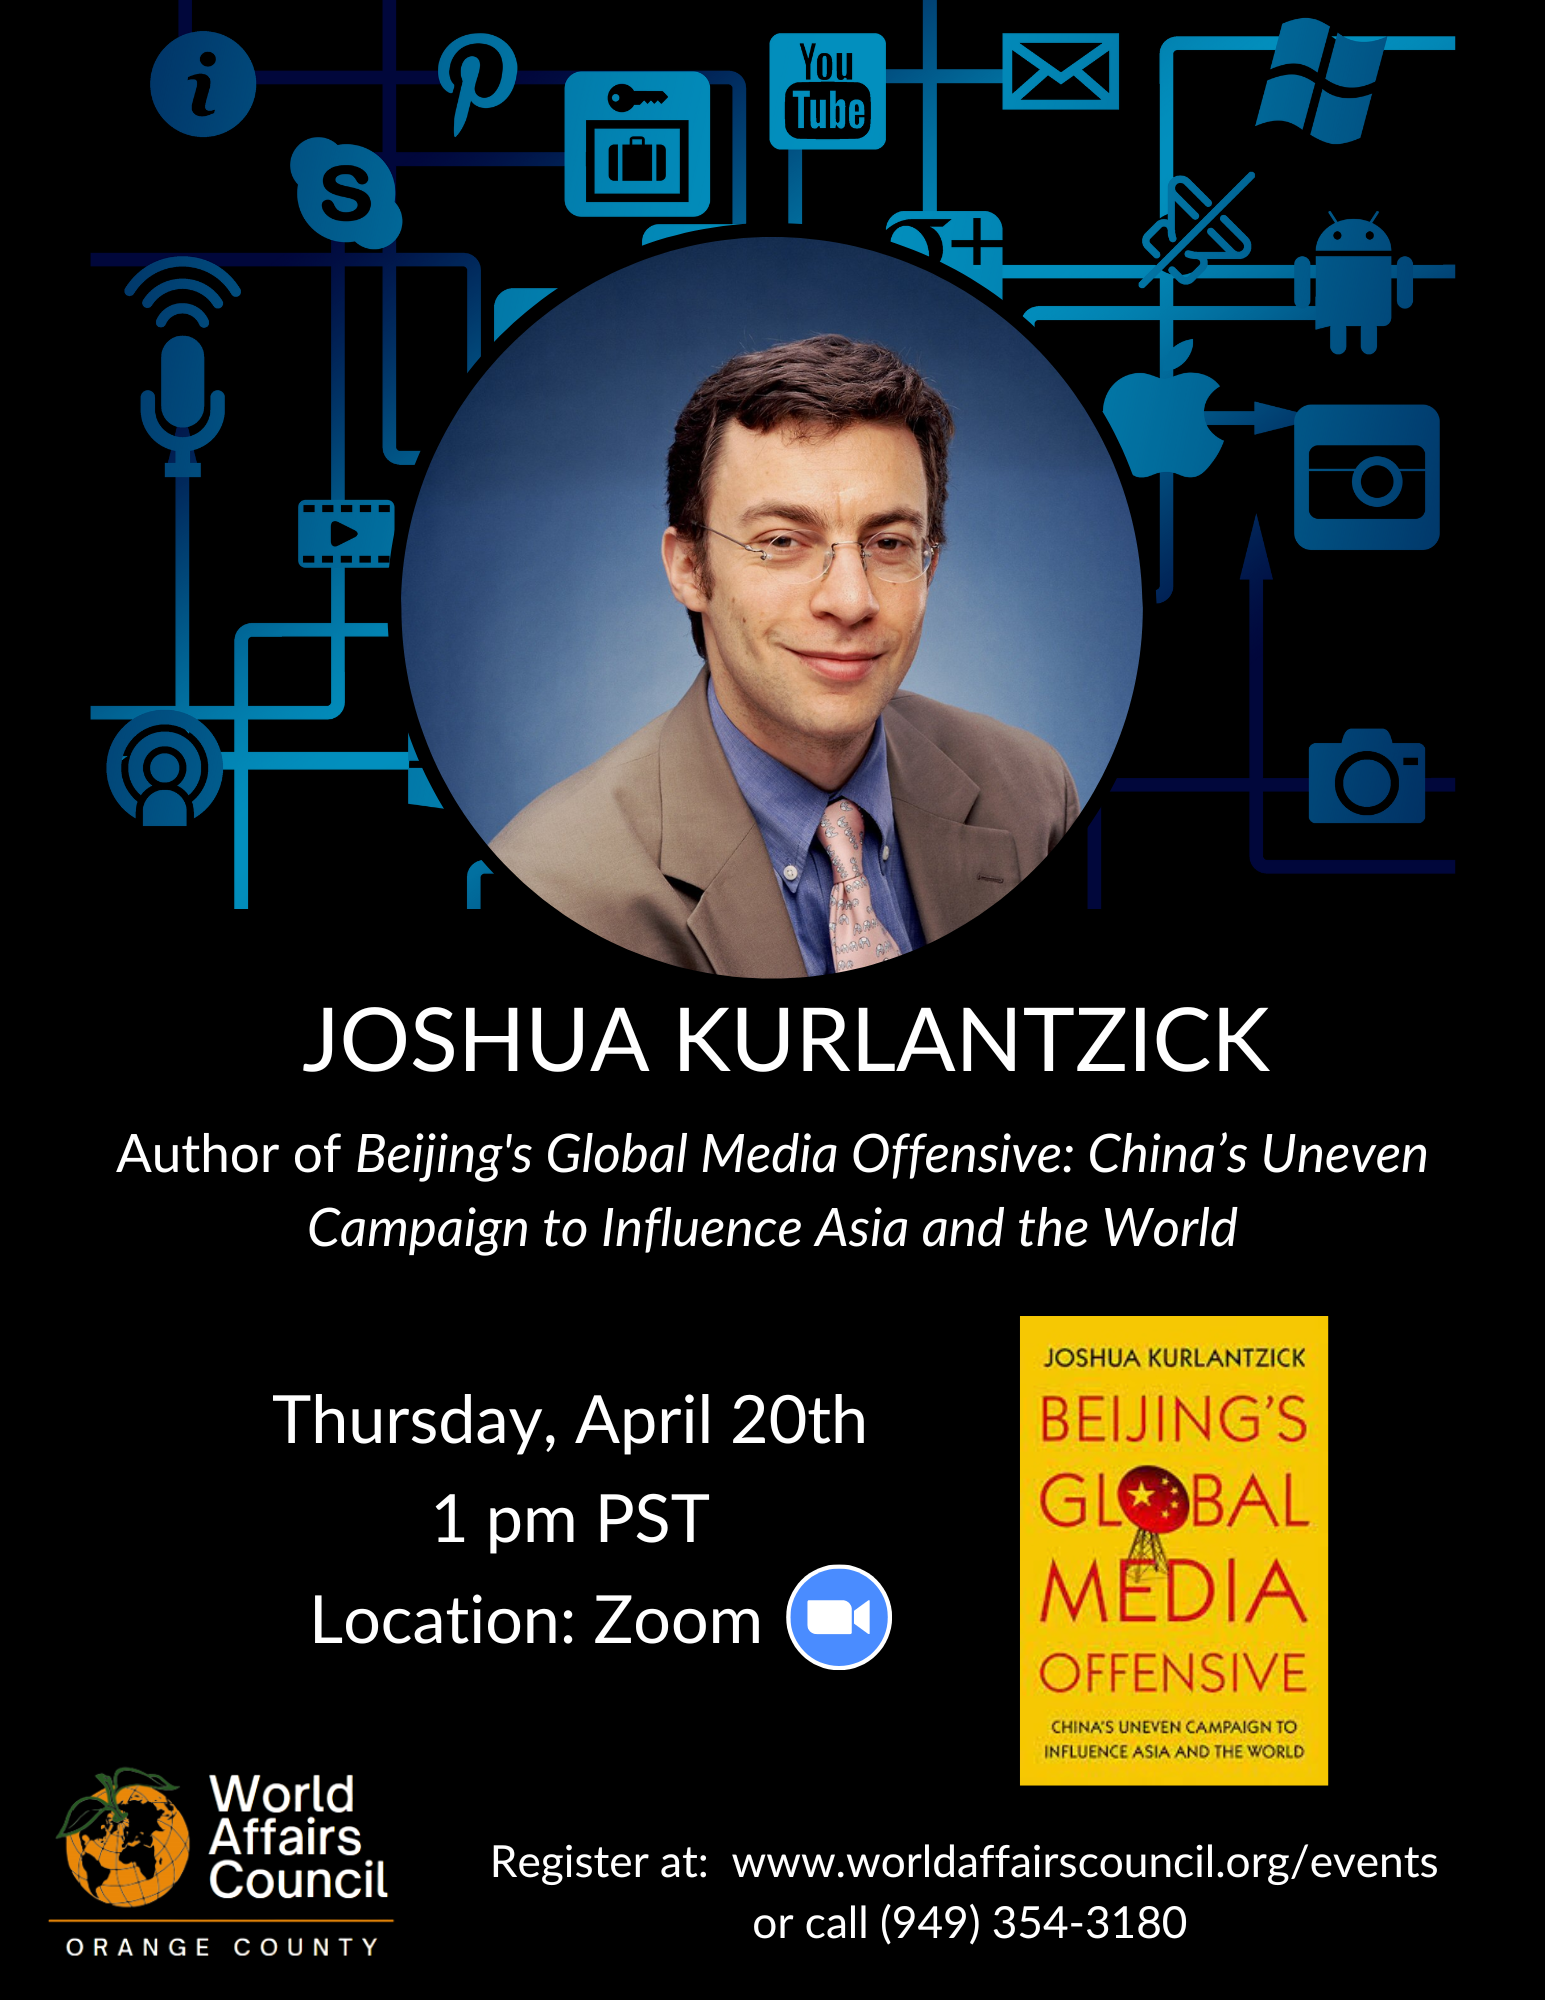 Beijing's Global Media Offensive: China’s Uneven Campaign to Influence Asia and the World Featuring Josh Kurlantzick